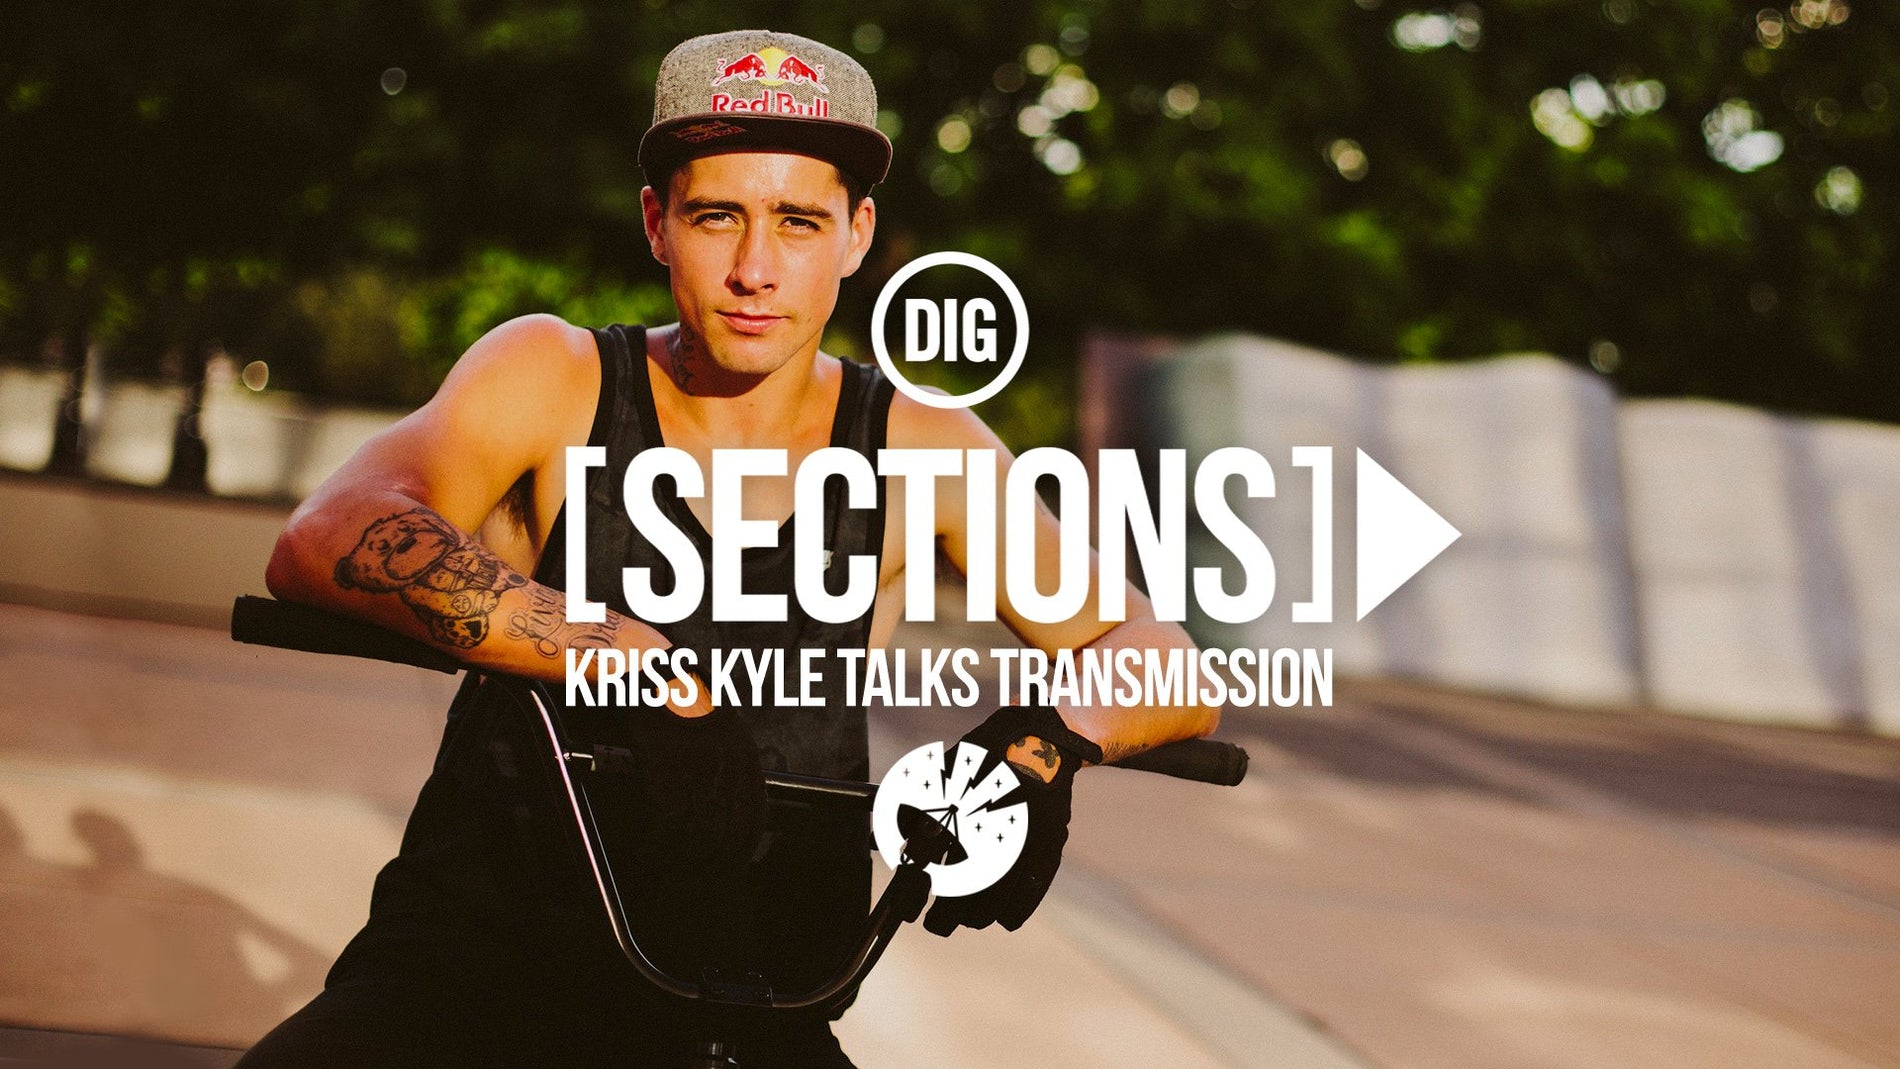 Kriss Kyle 'Sections'